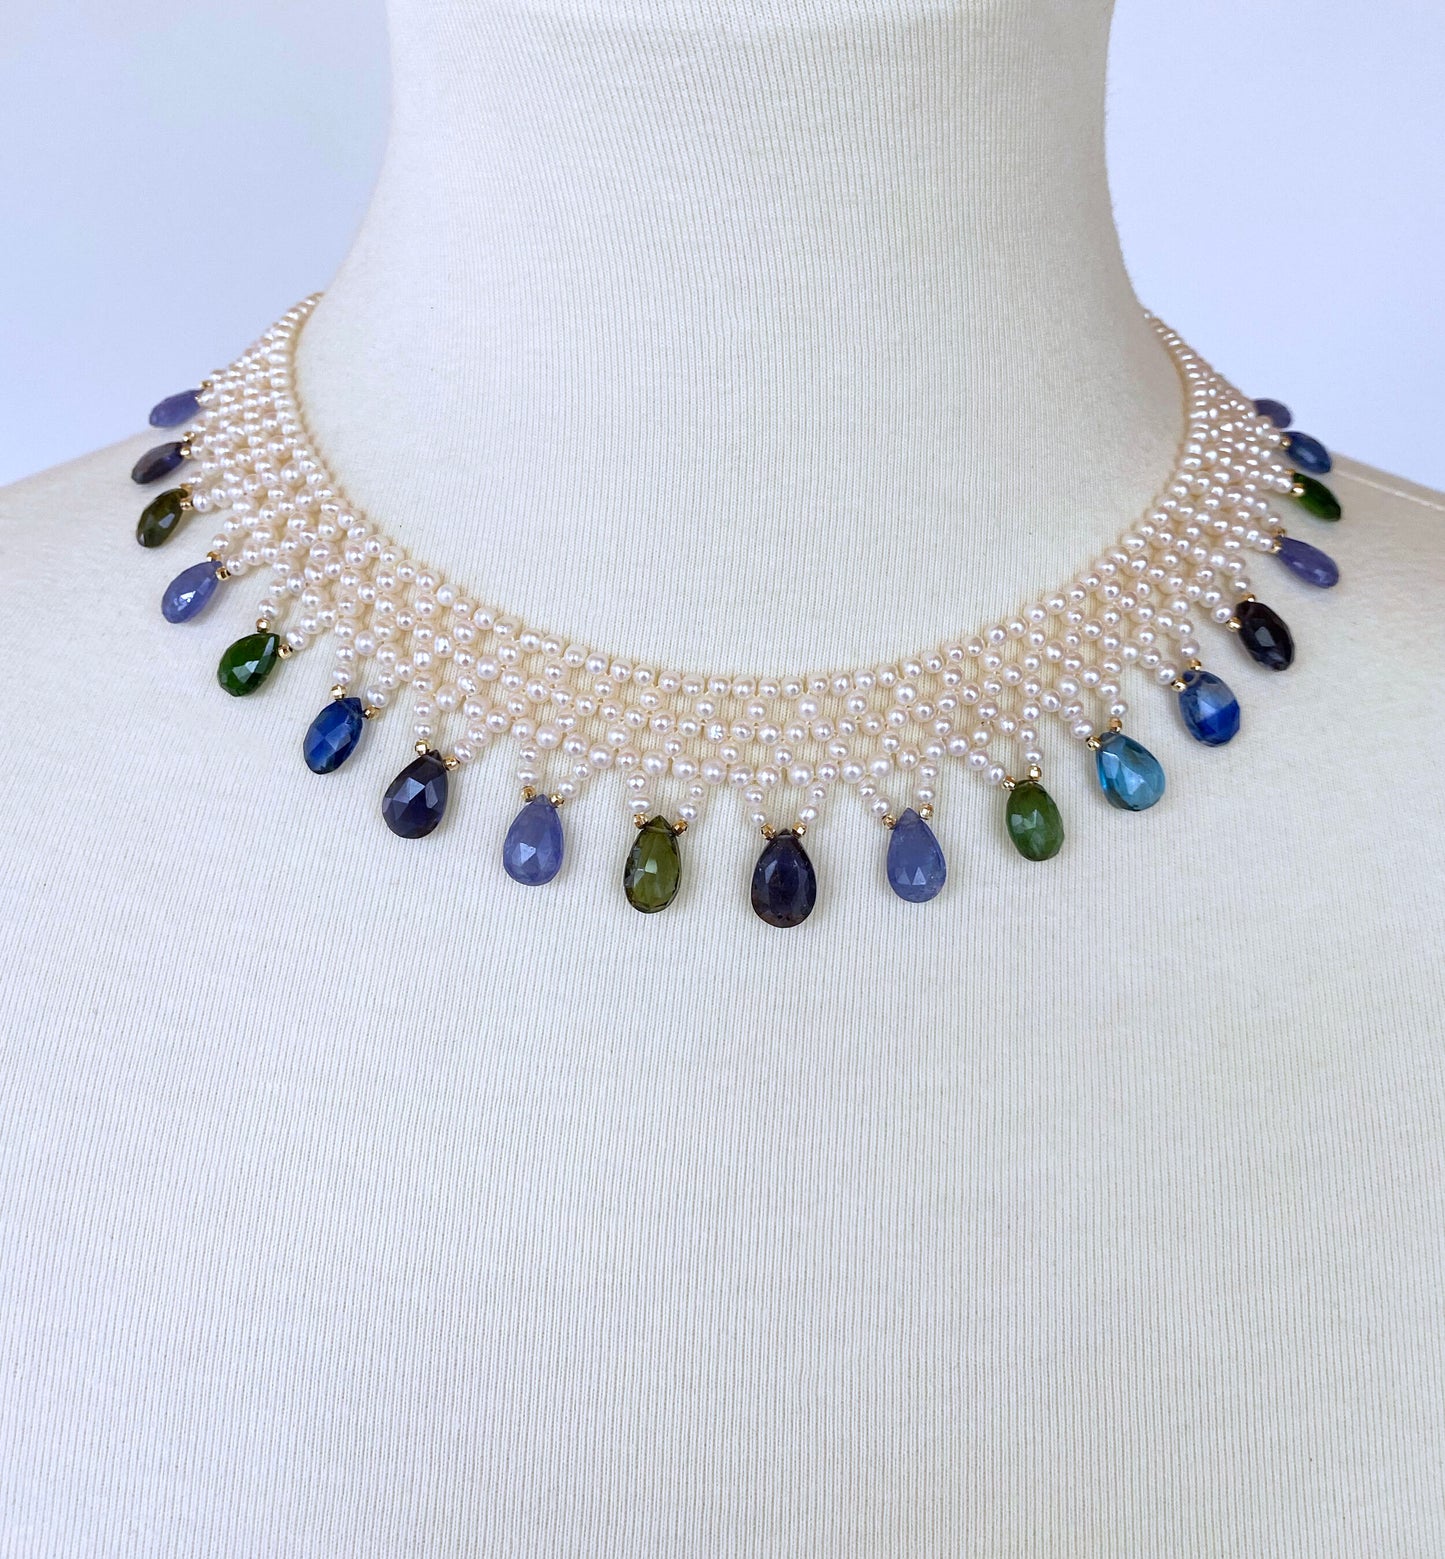 Hand Woven Multi Jewel and Pearl Necklace with 14K Yellow Gold